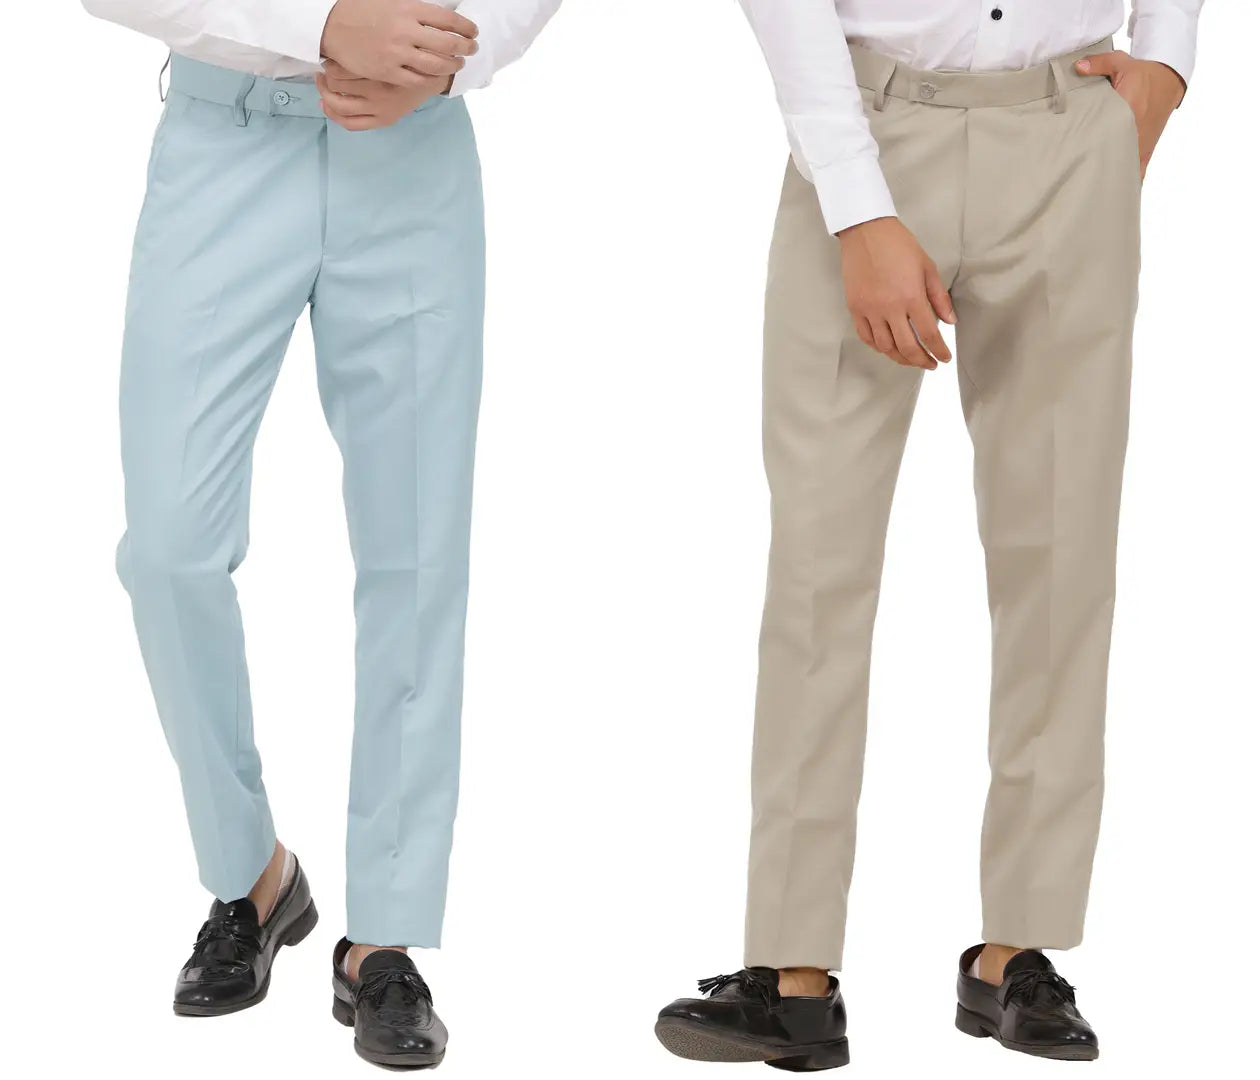 Kundan Men Poly-Viscose Blended Light Sky Blue and Light Cot Brown Formal Trousers ( Pack of 2 Trousers )